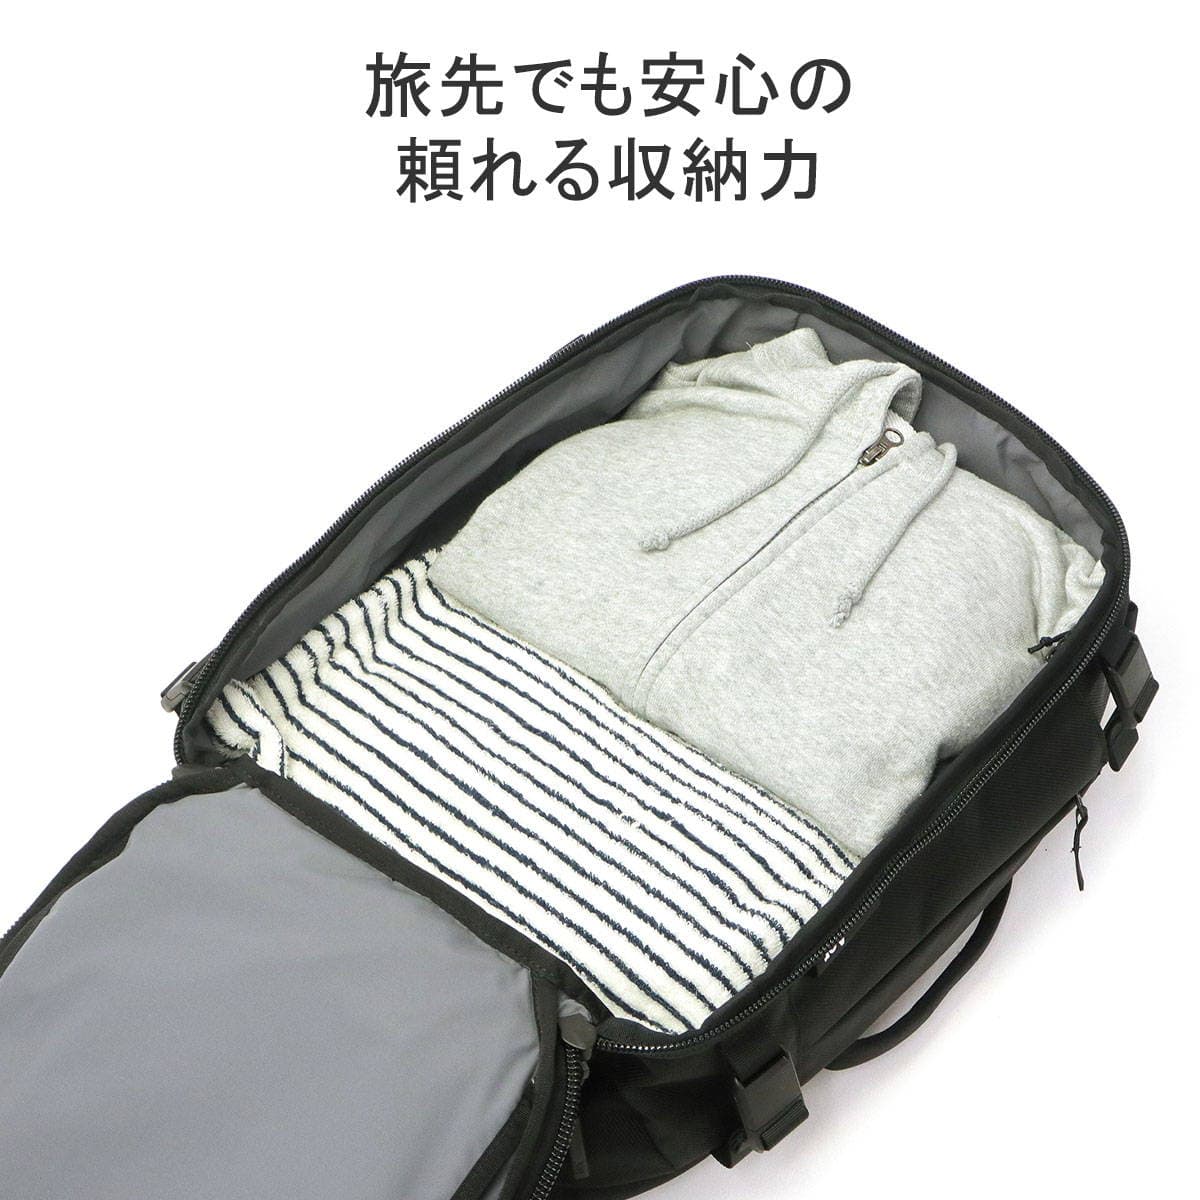 aer travel pack2 small 28l